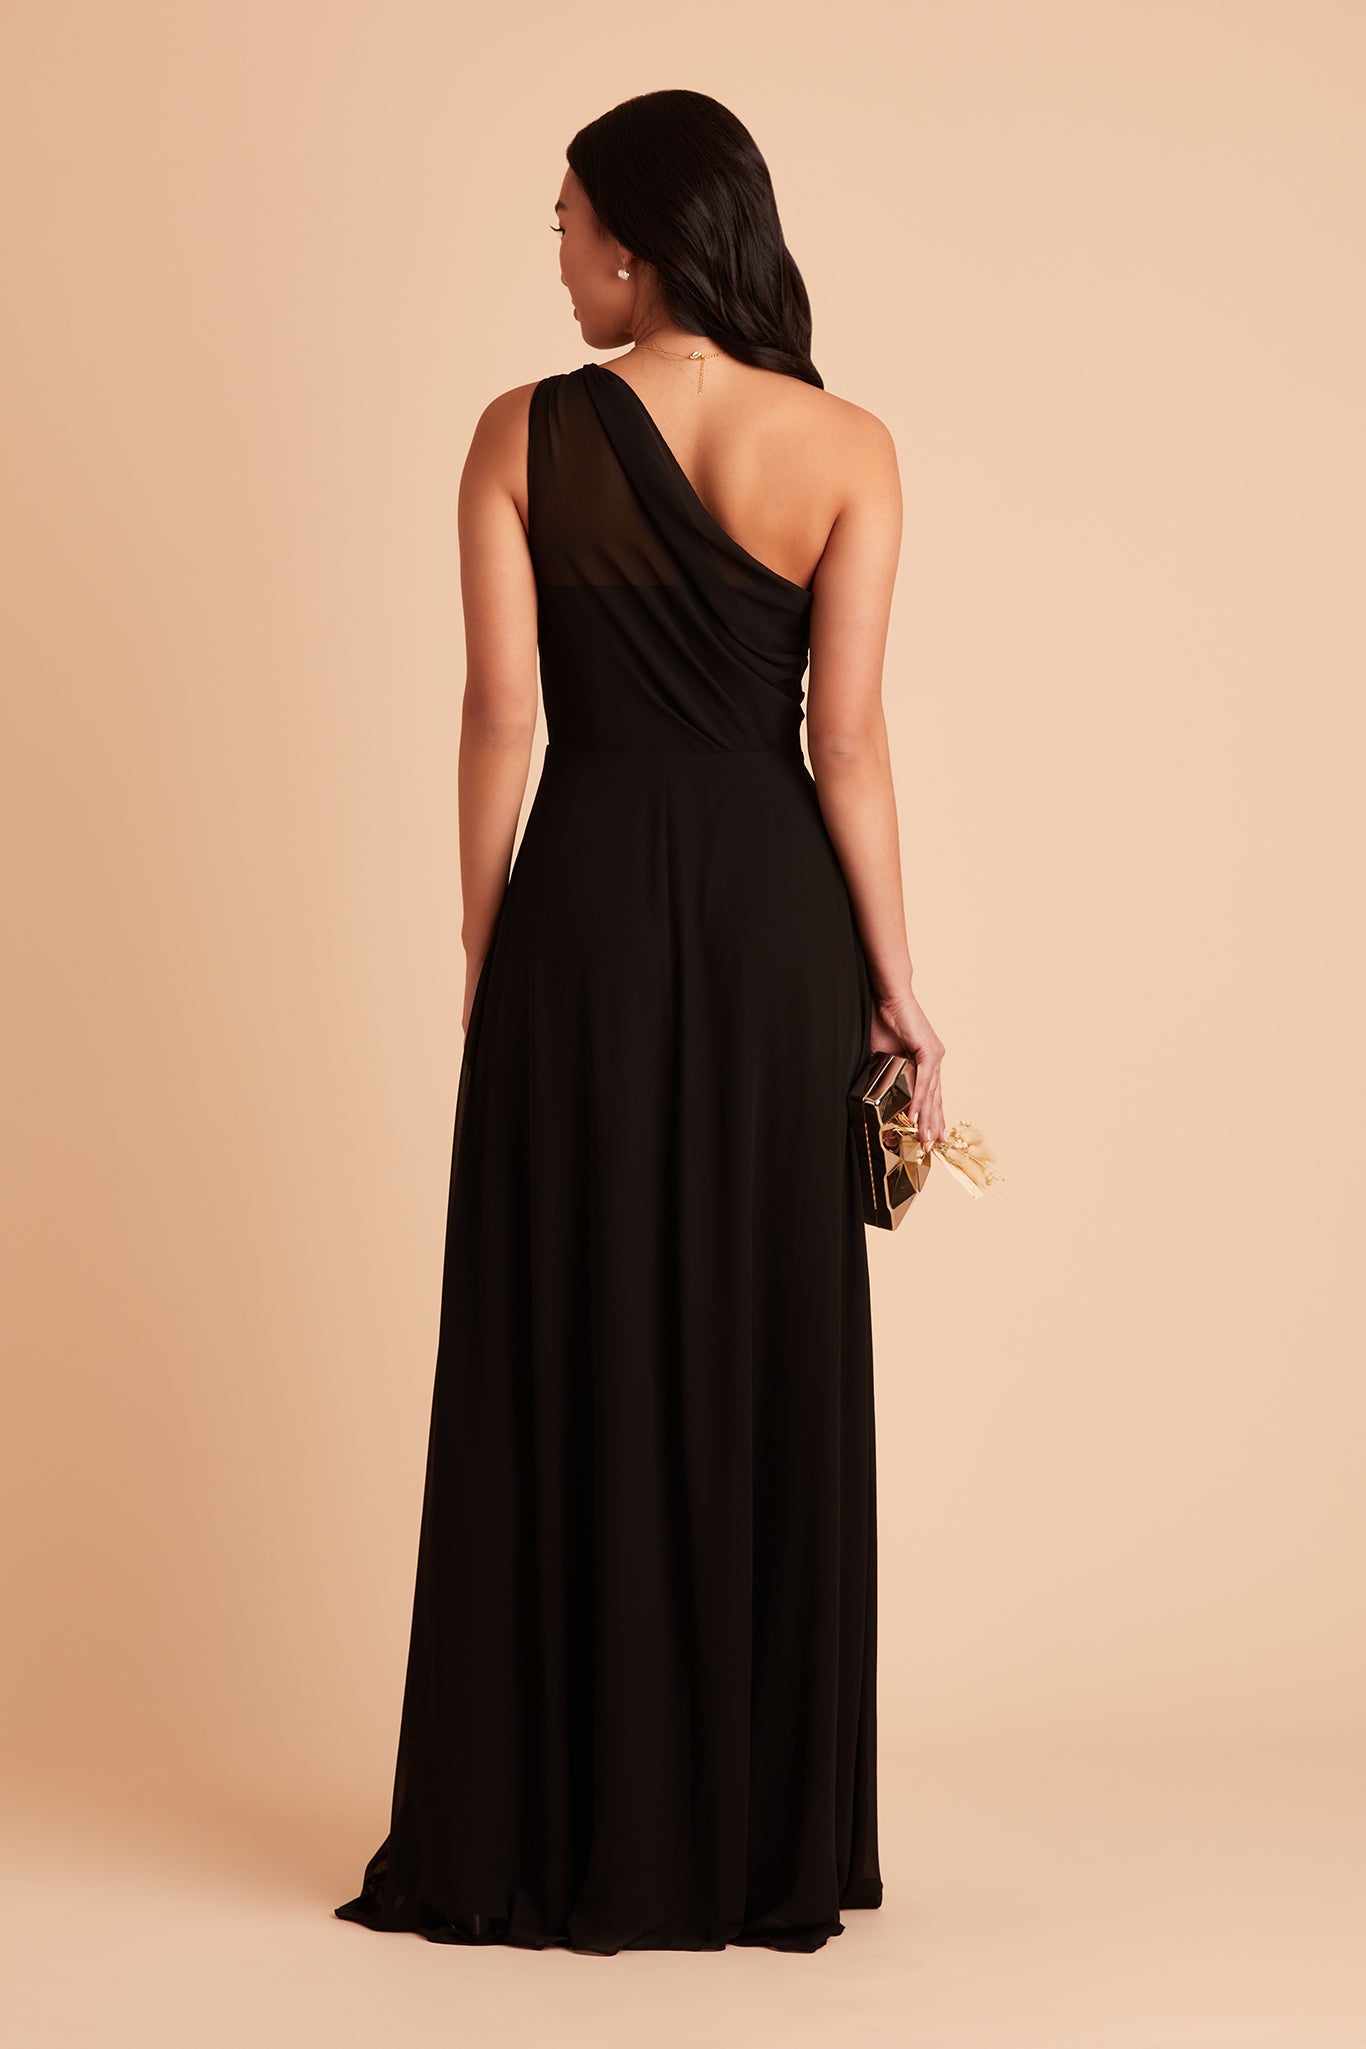 Back view of the Kira Dress in black chiffon shows the back of the dress with sheer chiffon fabric which creates a pleated Grecian one-shoulder neckline and bodice.